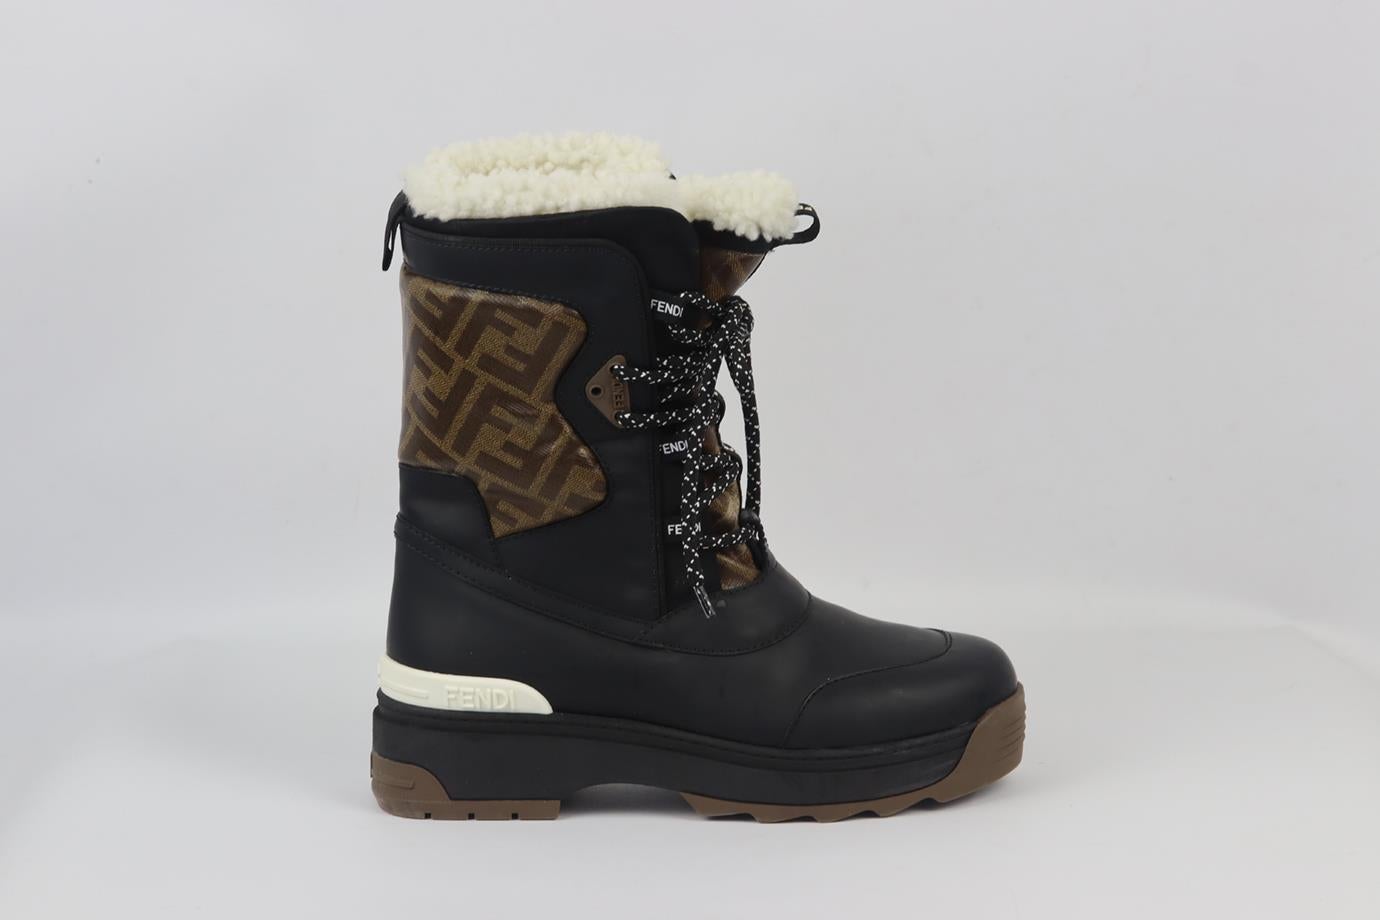 Fendi shearling lined ff logo jacquard canvas and rubber snow boots. Cream, brown and black. Lace up fastening at front. Does not come with dustbag or box. Size: EU 38.5 (UK 5.5, US 8.5). Insole: 9.7 in. Shaft: 8.6 in. Heel Height: 1.4 in. Very good